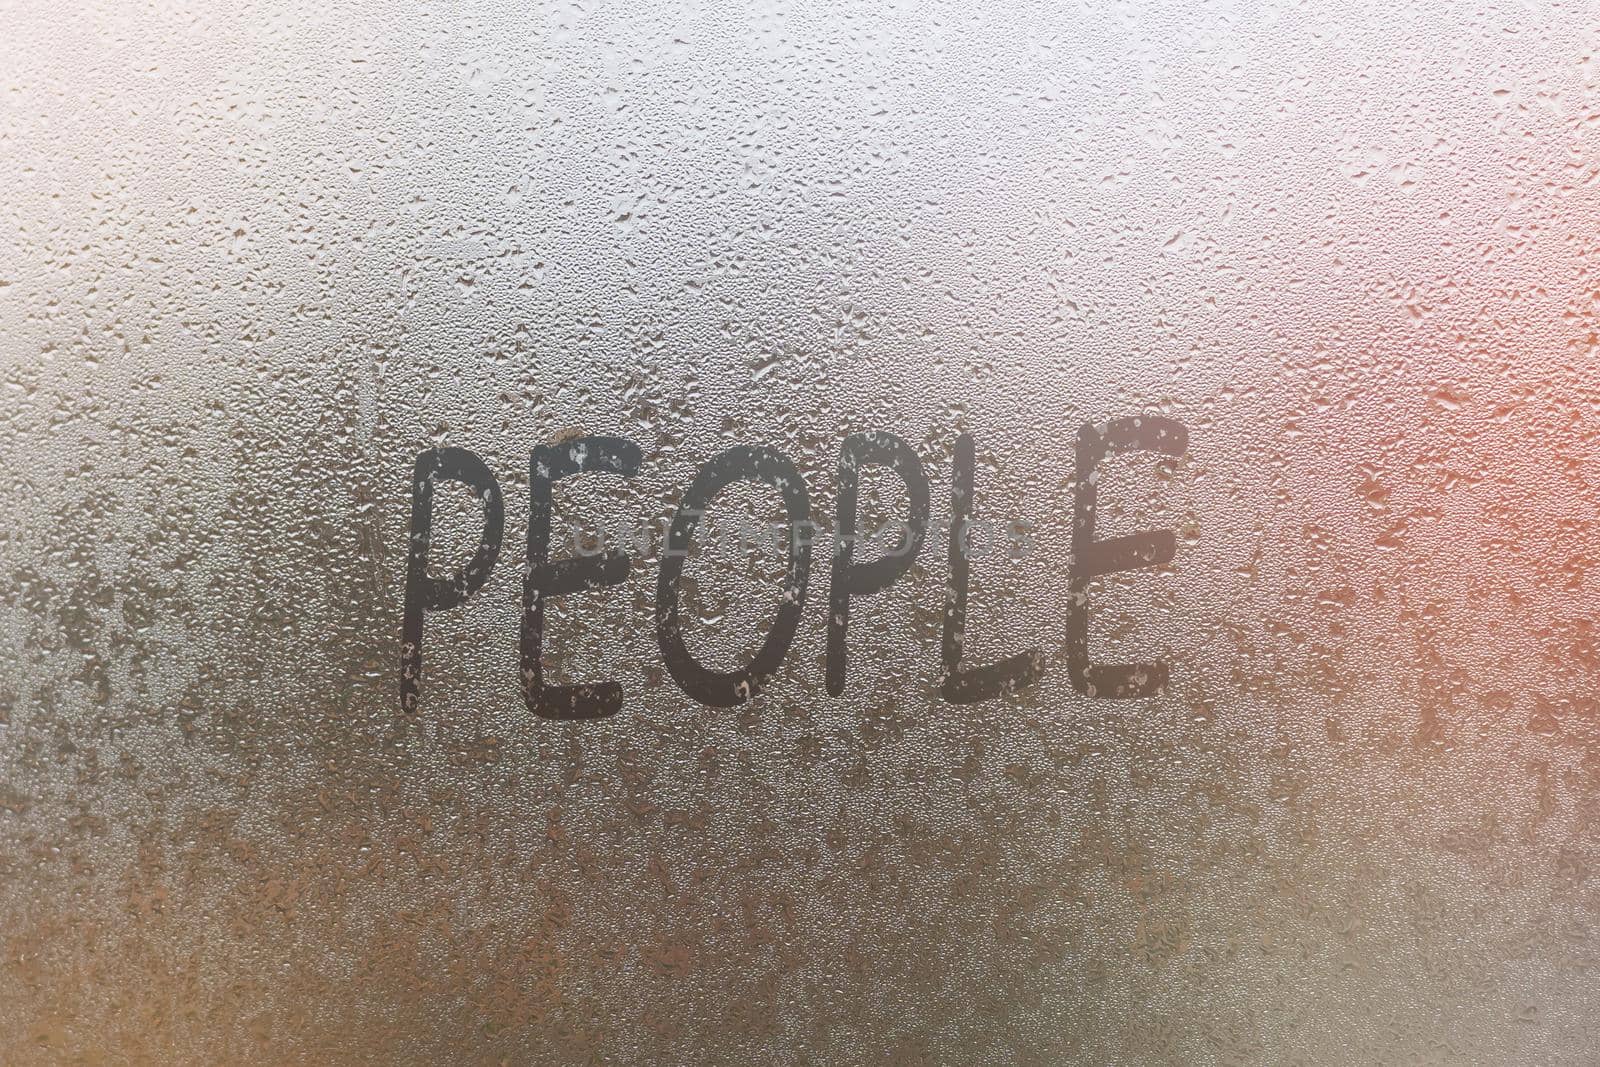 Word - people. Abstract background with drops of water. Inscription on foggy window. Handwritten text on wet glass.